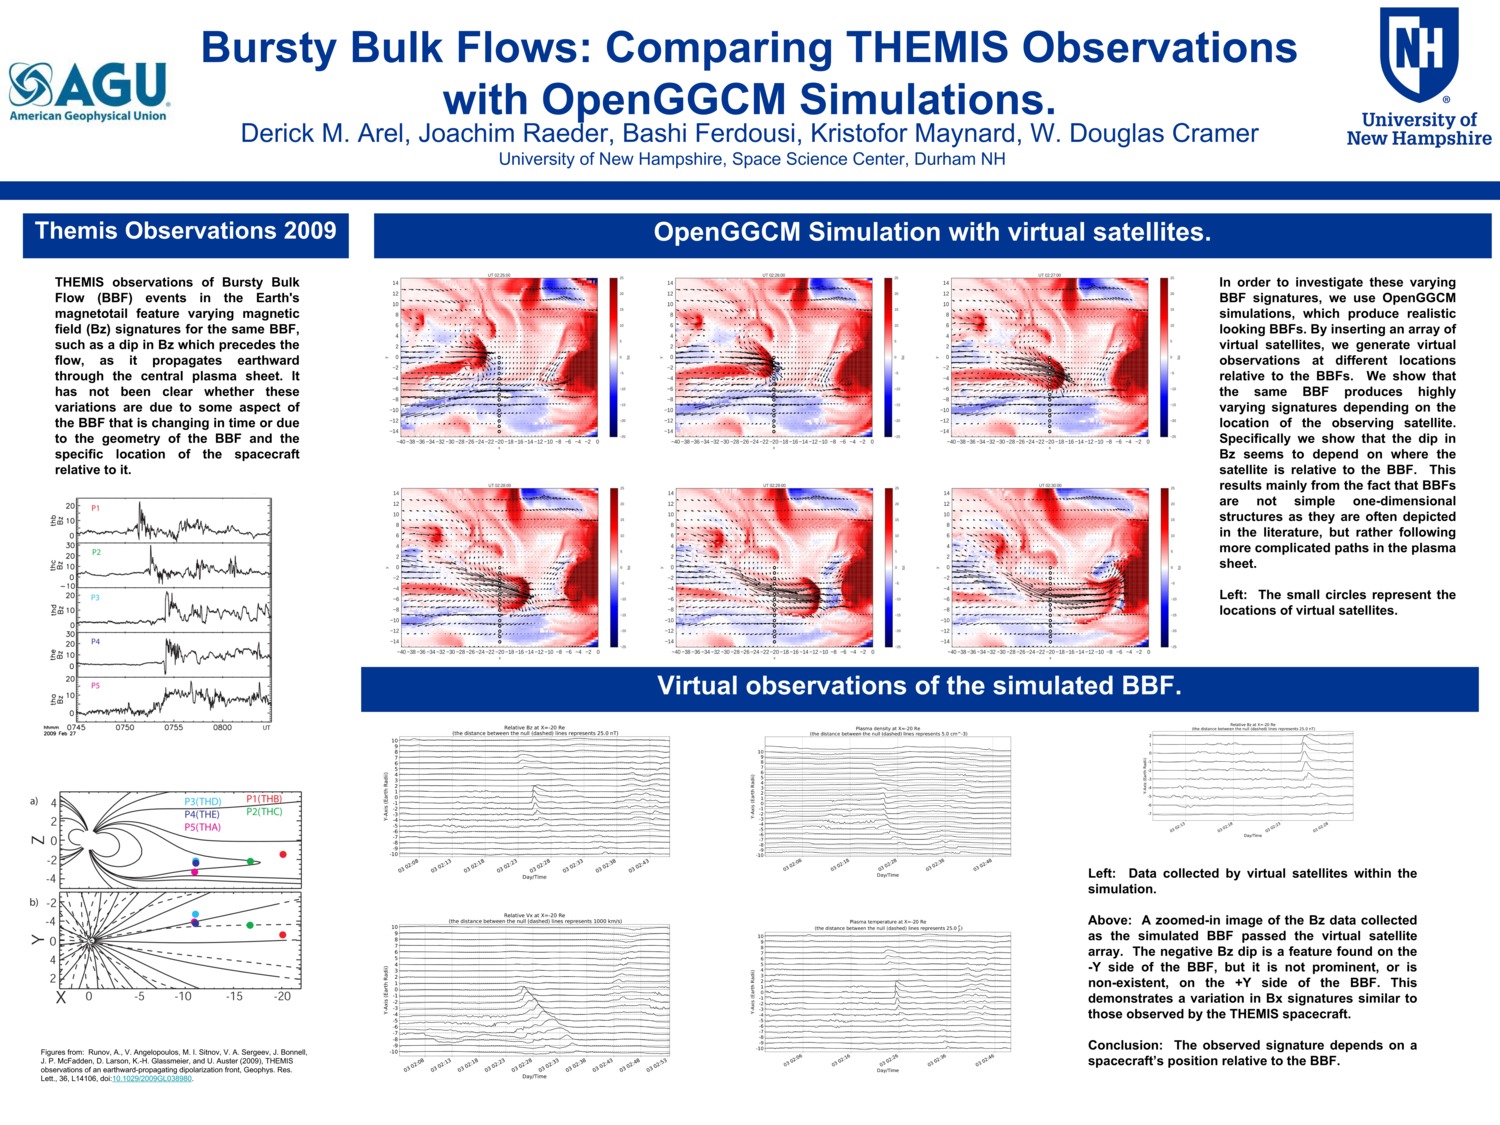 Agu Bursty Bulk Flows_ Comparing Themis Observations With Openggcm Simulations. by dma1011